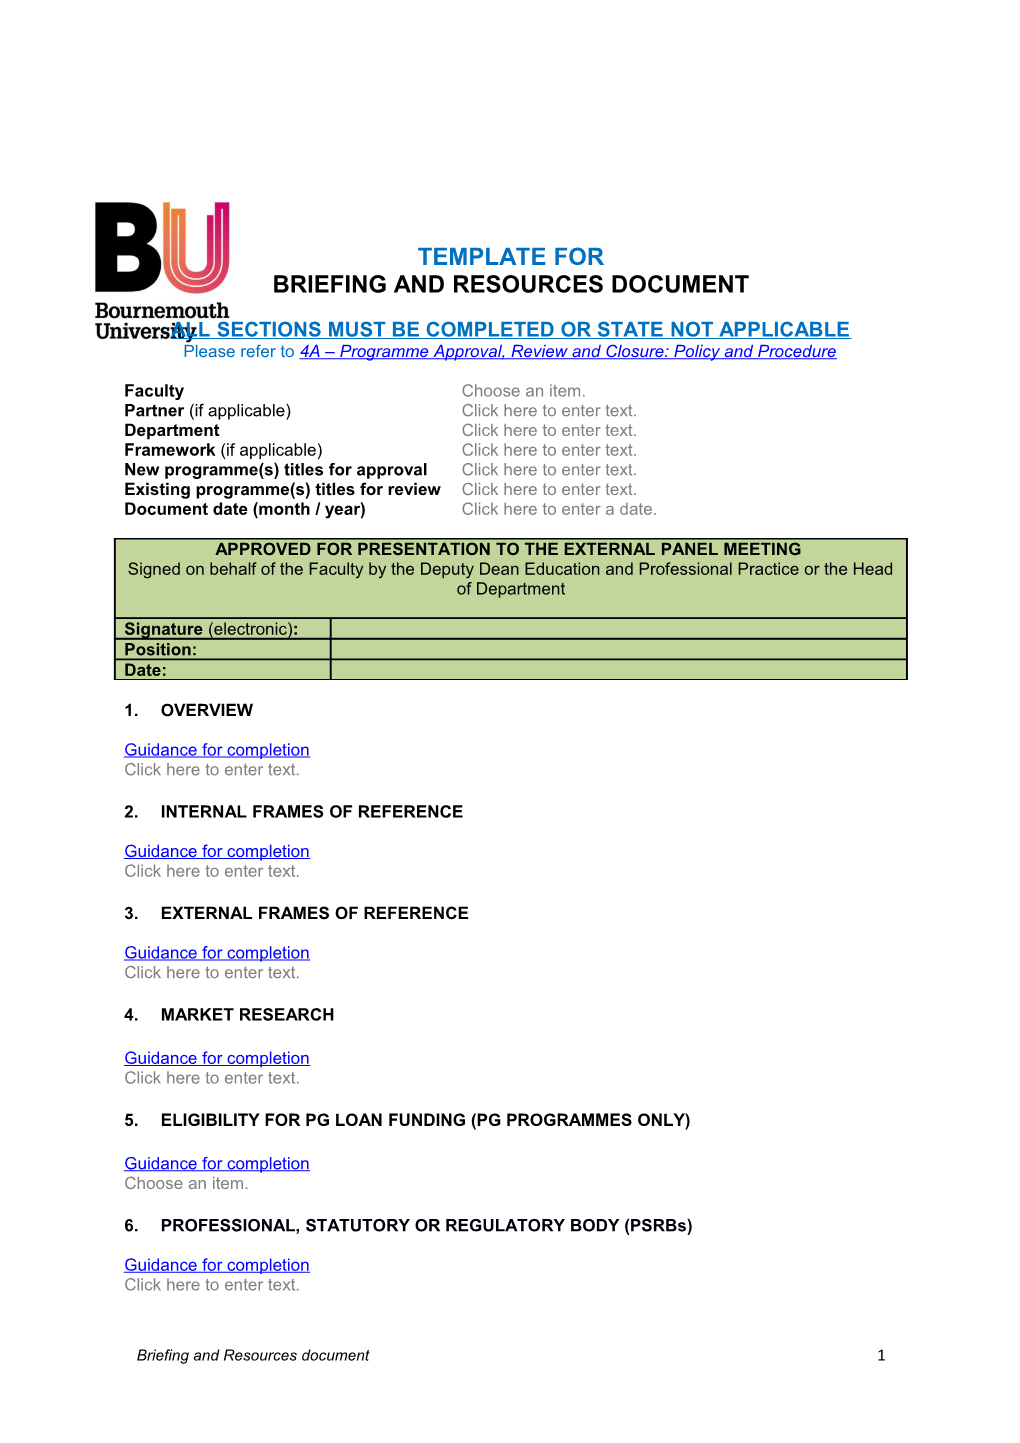 4A Briefing and Resources Document Template